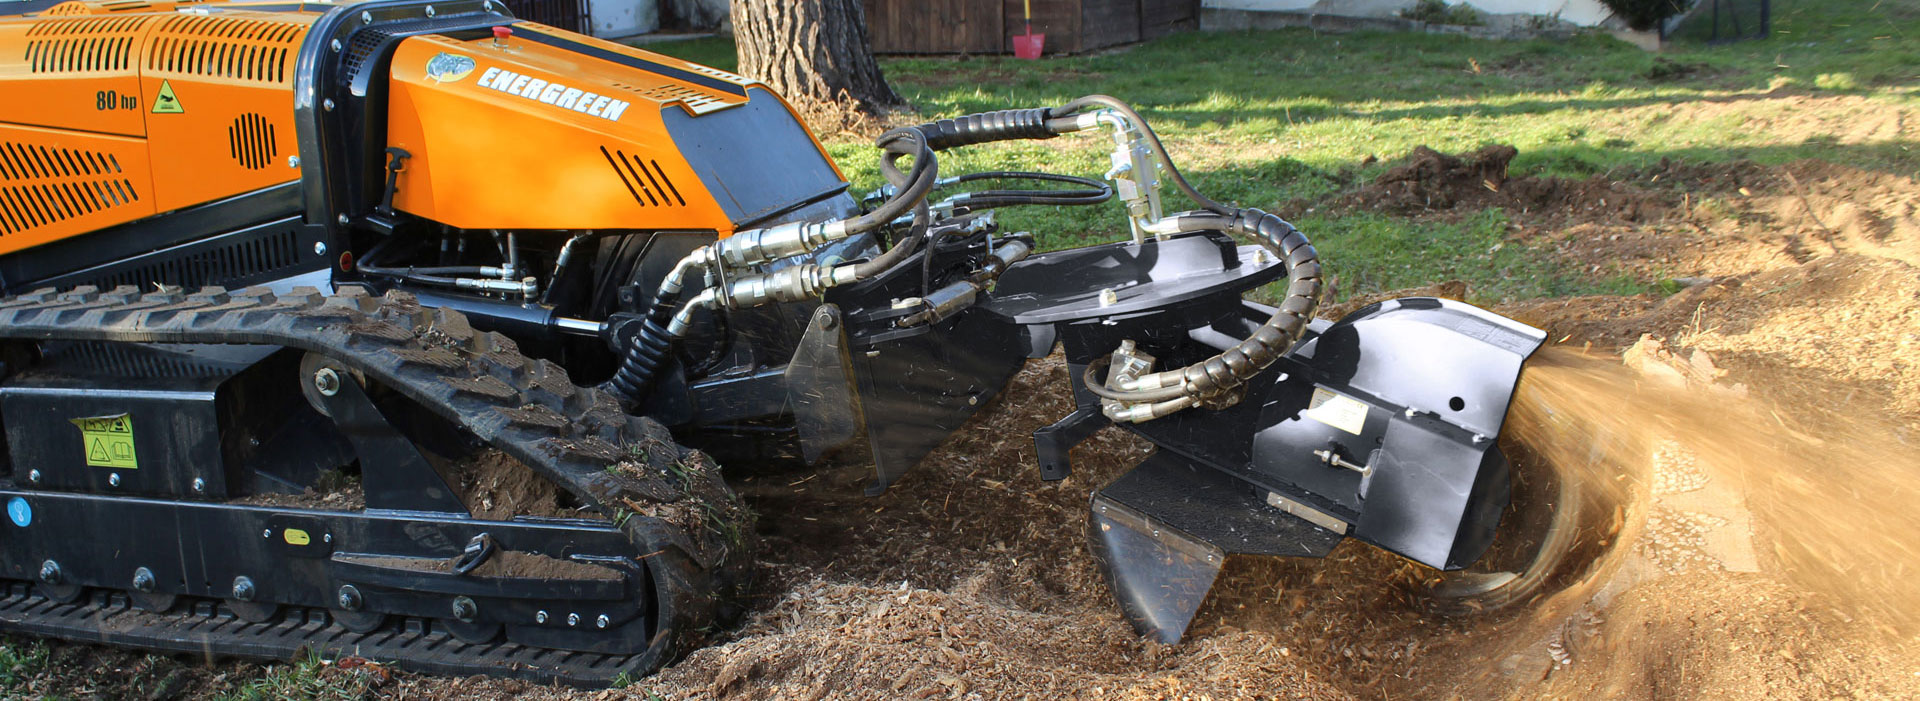 Energreen RoboMAX Remote Controlled Forestry Mulcher for Sale